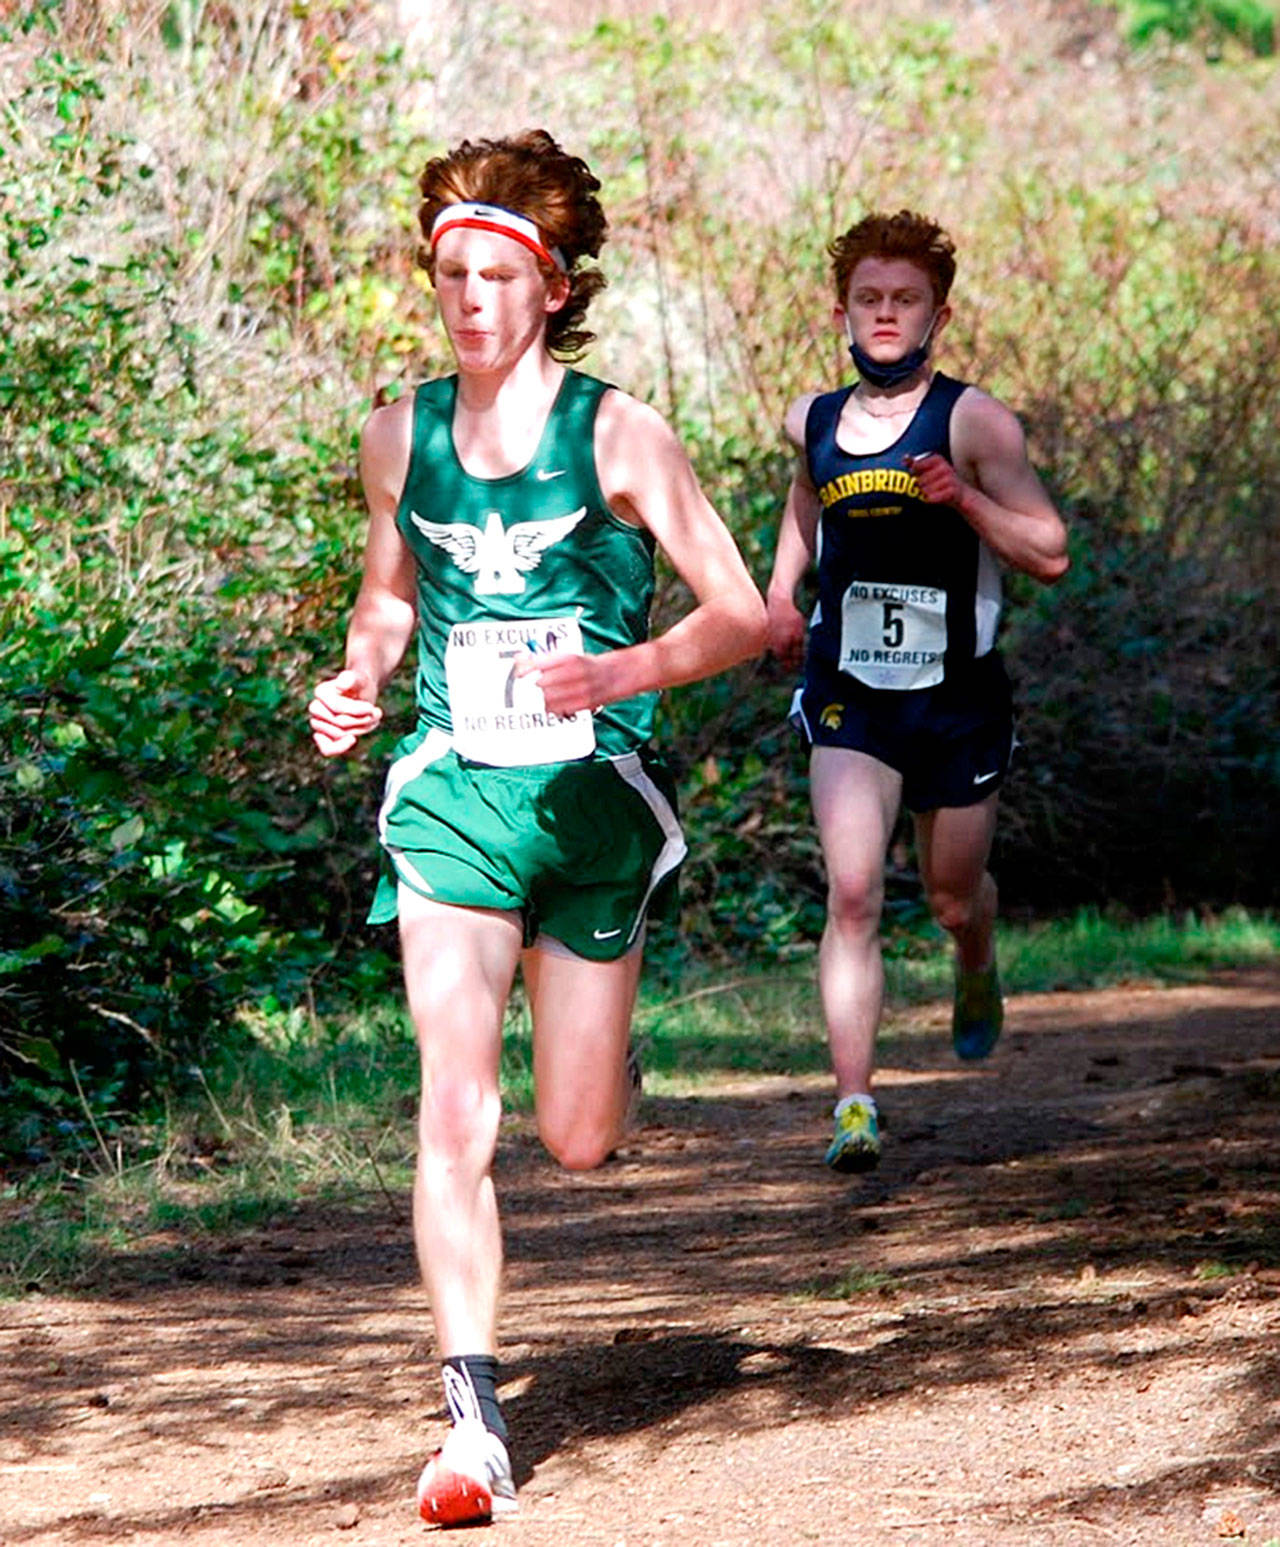 Port Angeles’ Jack Gladfelter finished fifth at the Northwest Region Cross Country championships, as the Roughrider boys ran to a regional title. (Rodger Johnson/Port Angeles Cross Country)